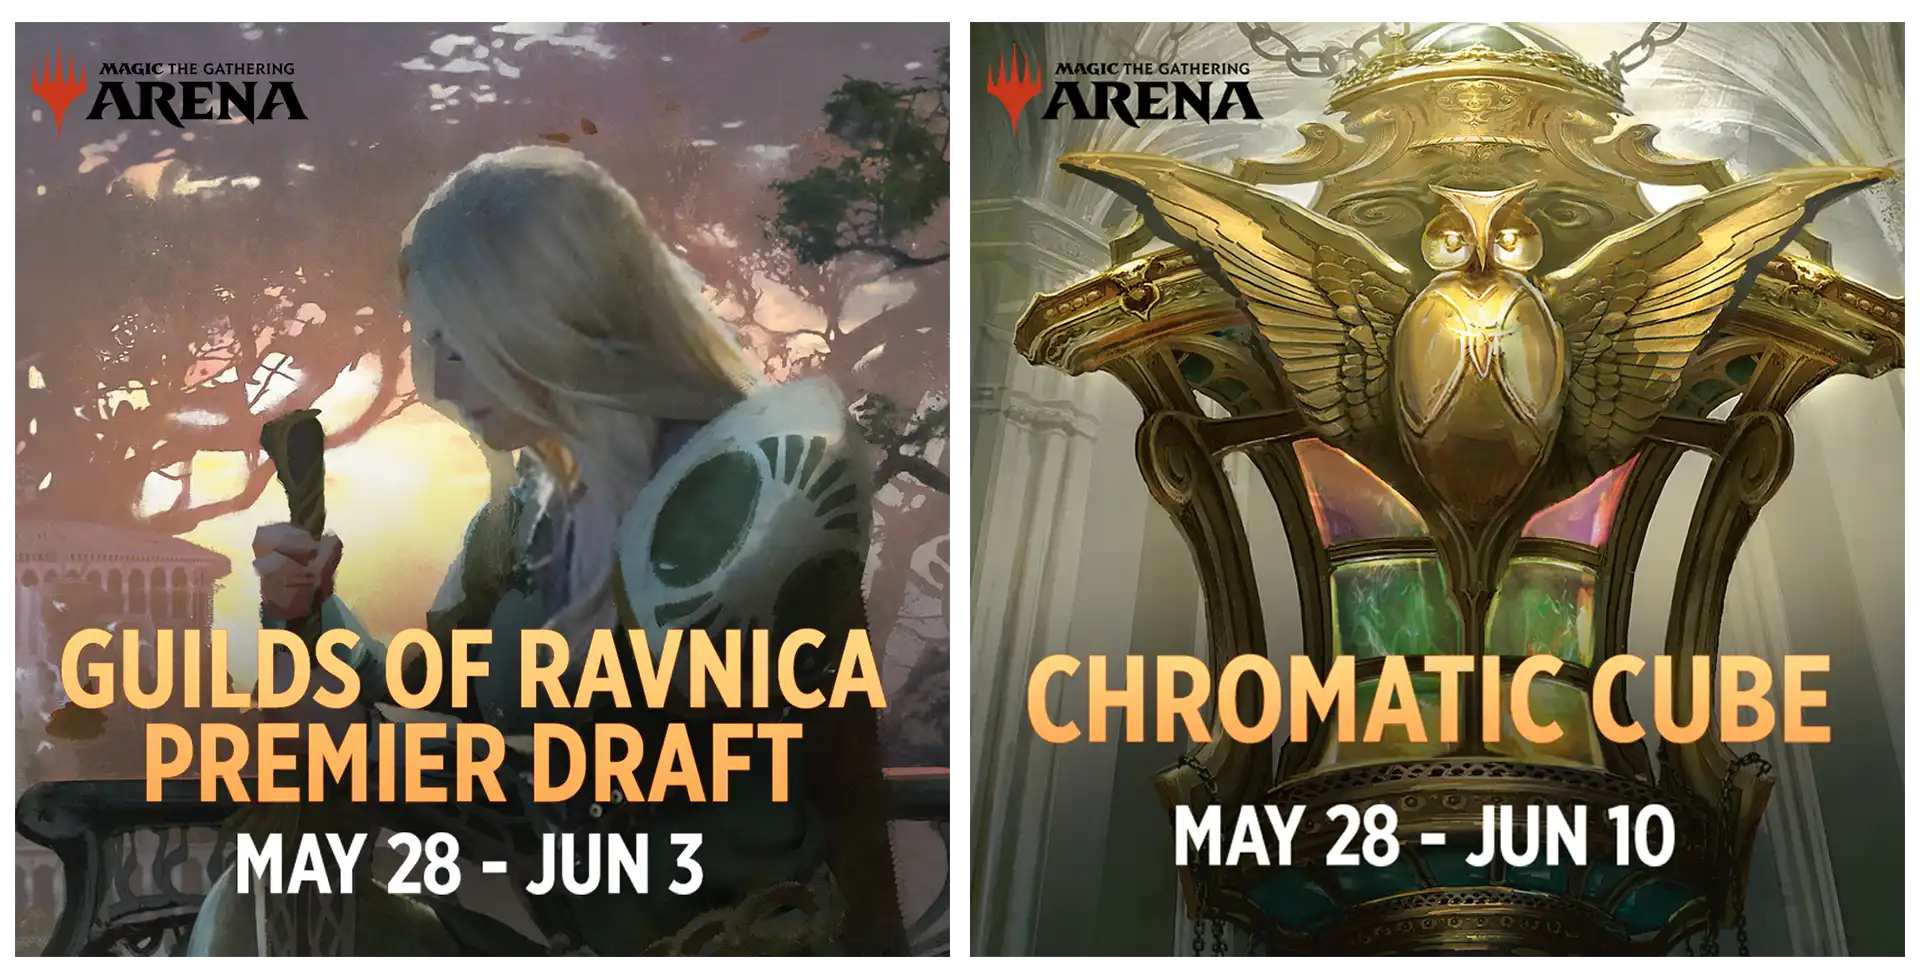 Guilds of Ravnica Premier Draft, May 28–June 3, and Chromatic Cube, May 28–June 10